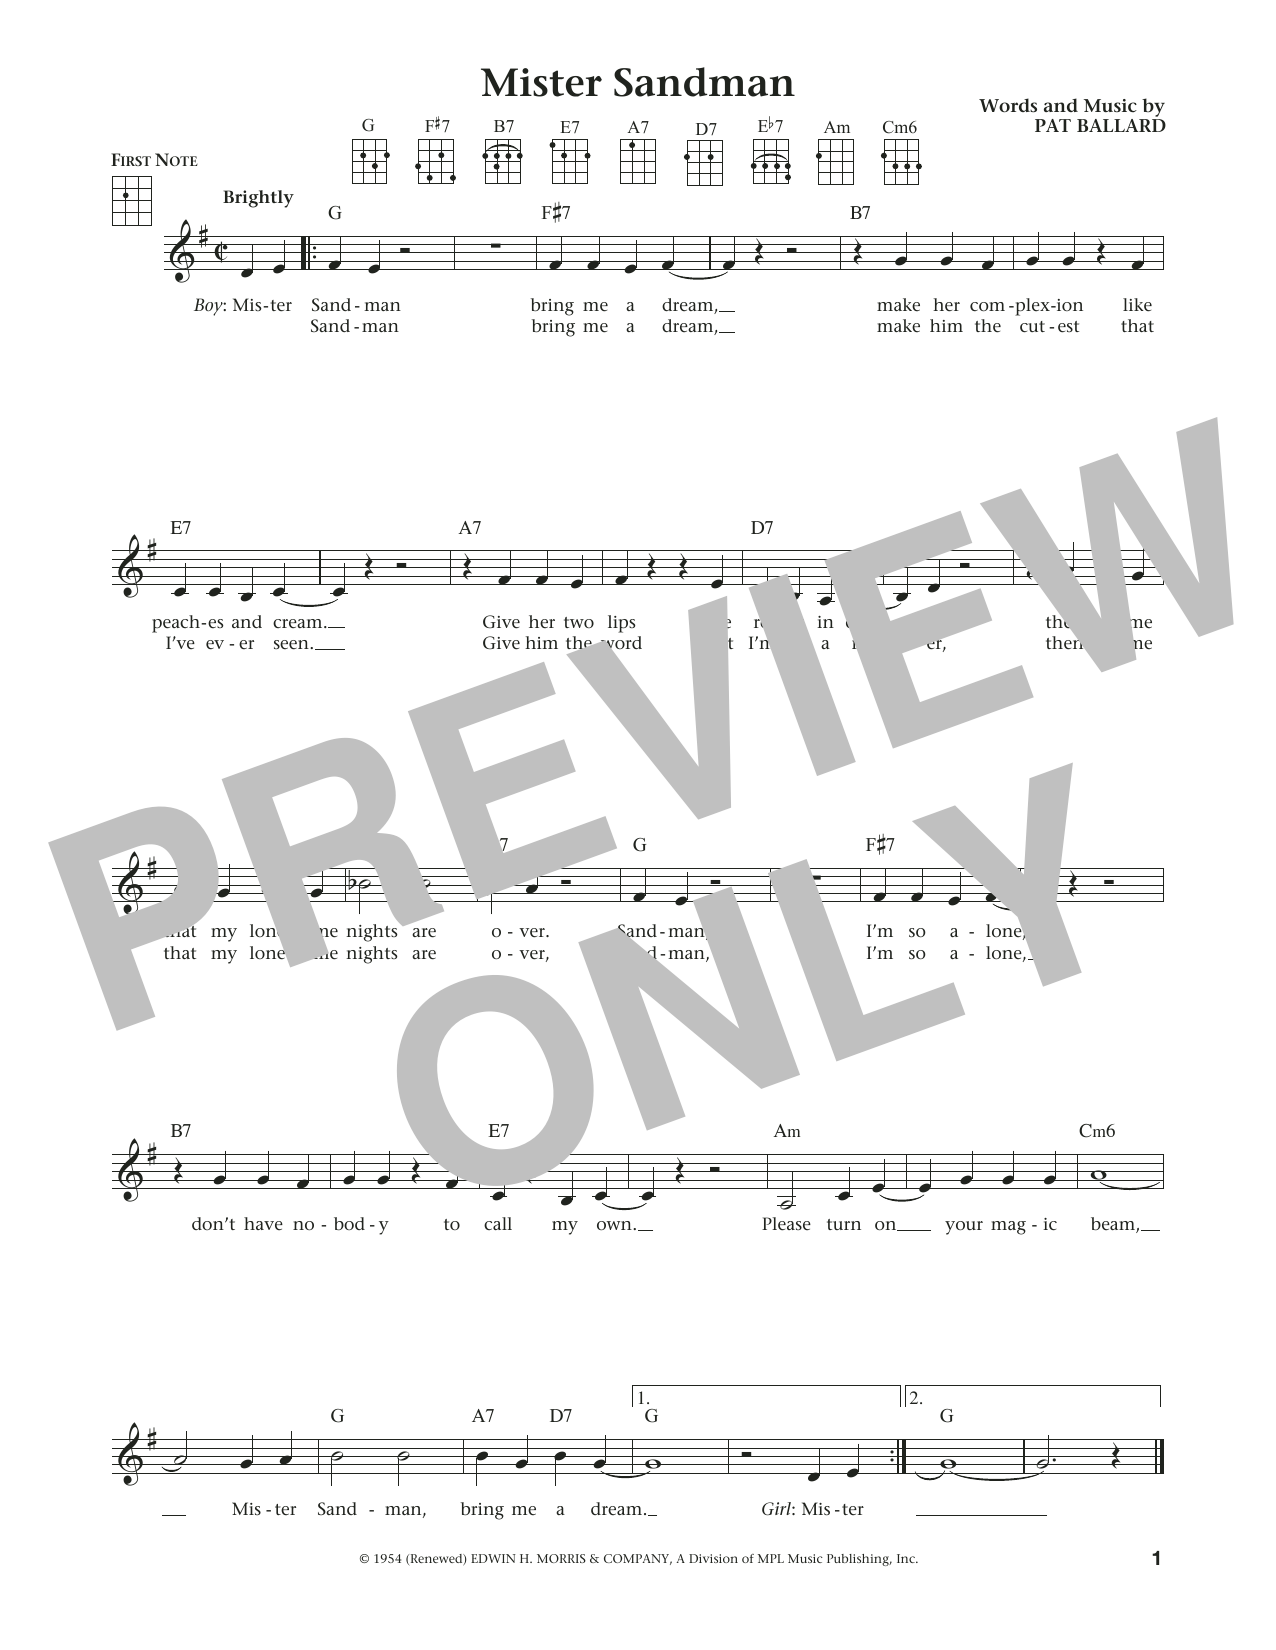 Download The Chordettes Mister Sandman (from The Daily Ukulele) Sheet Music